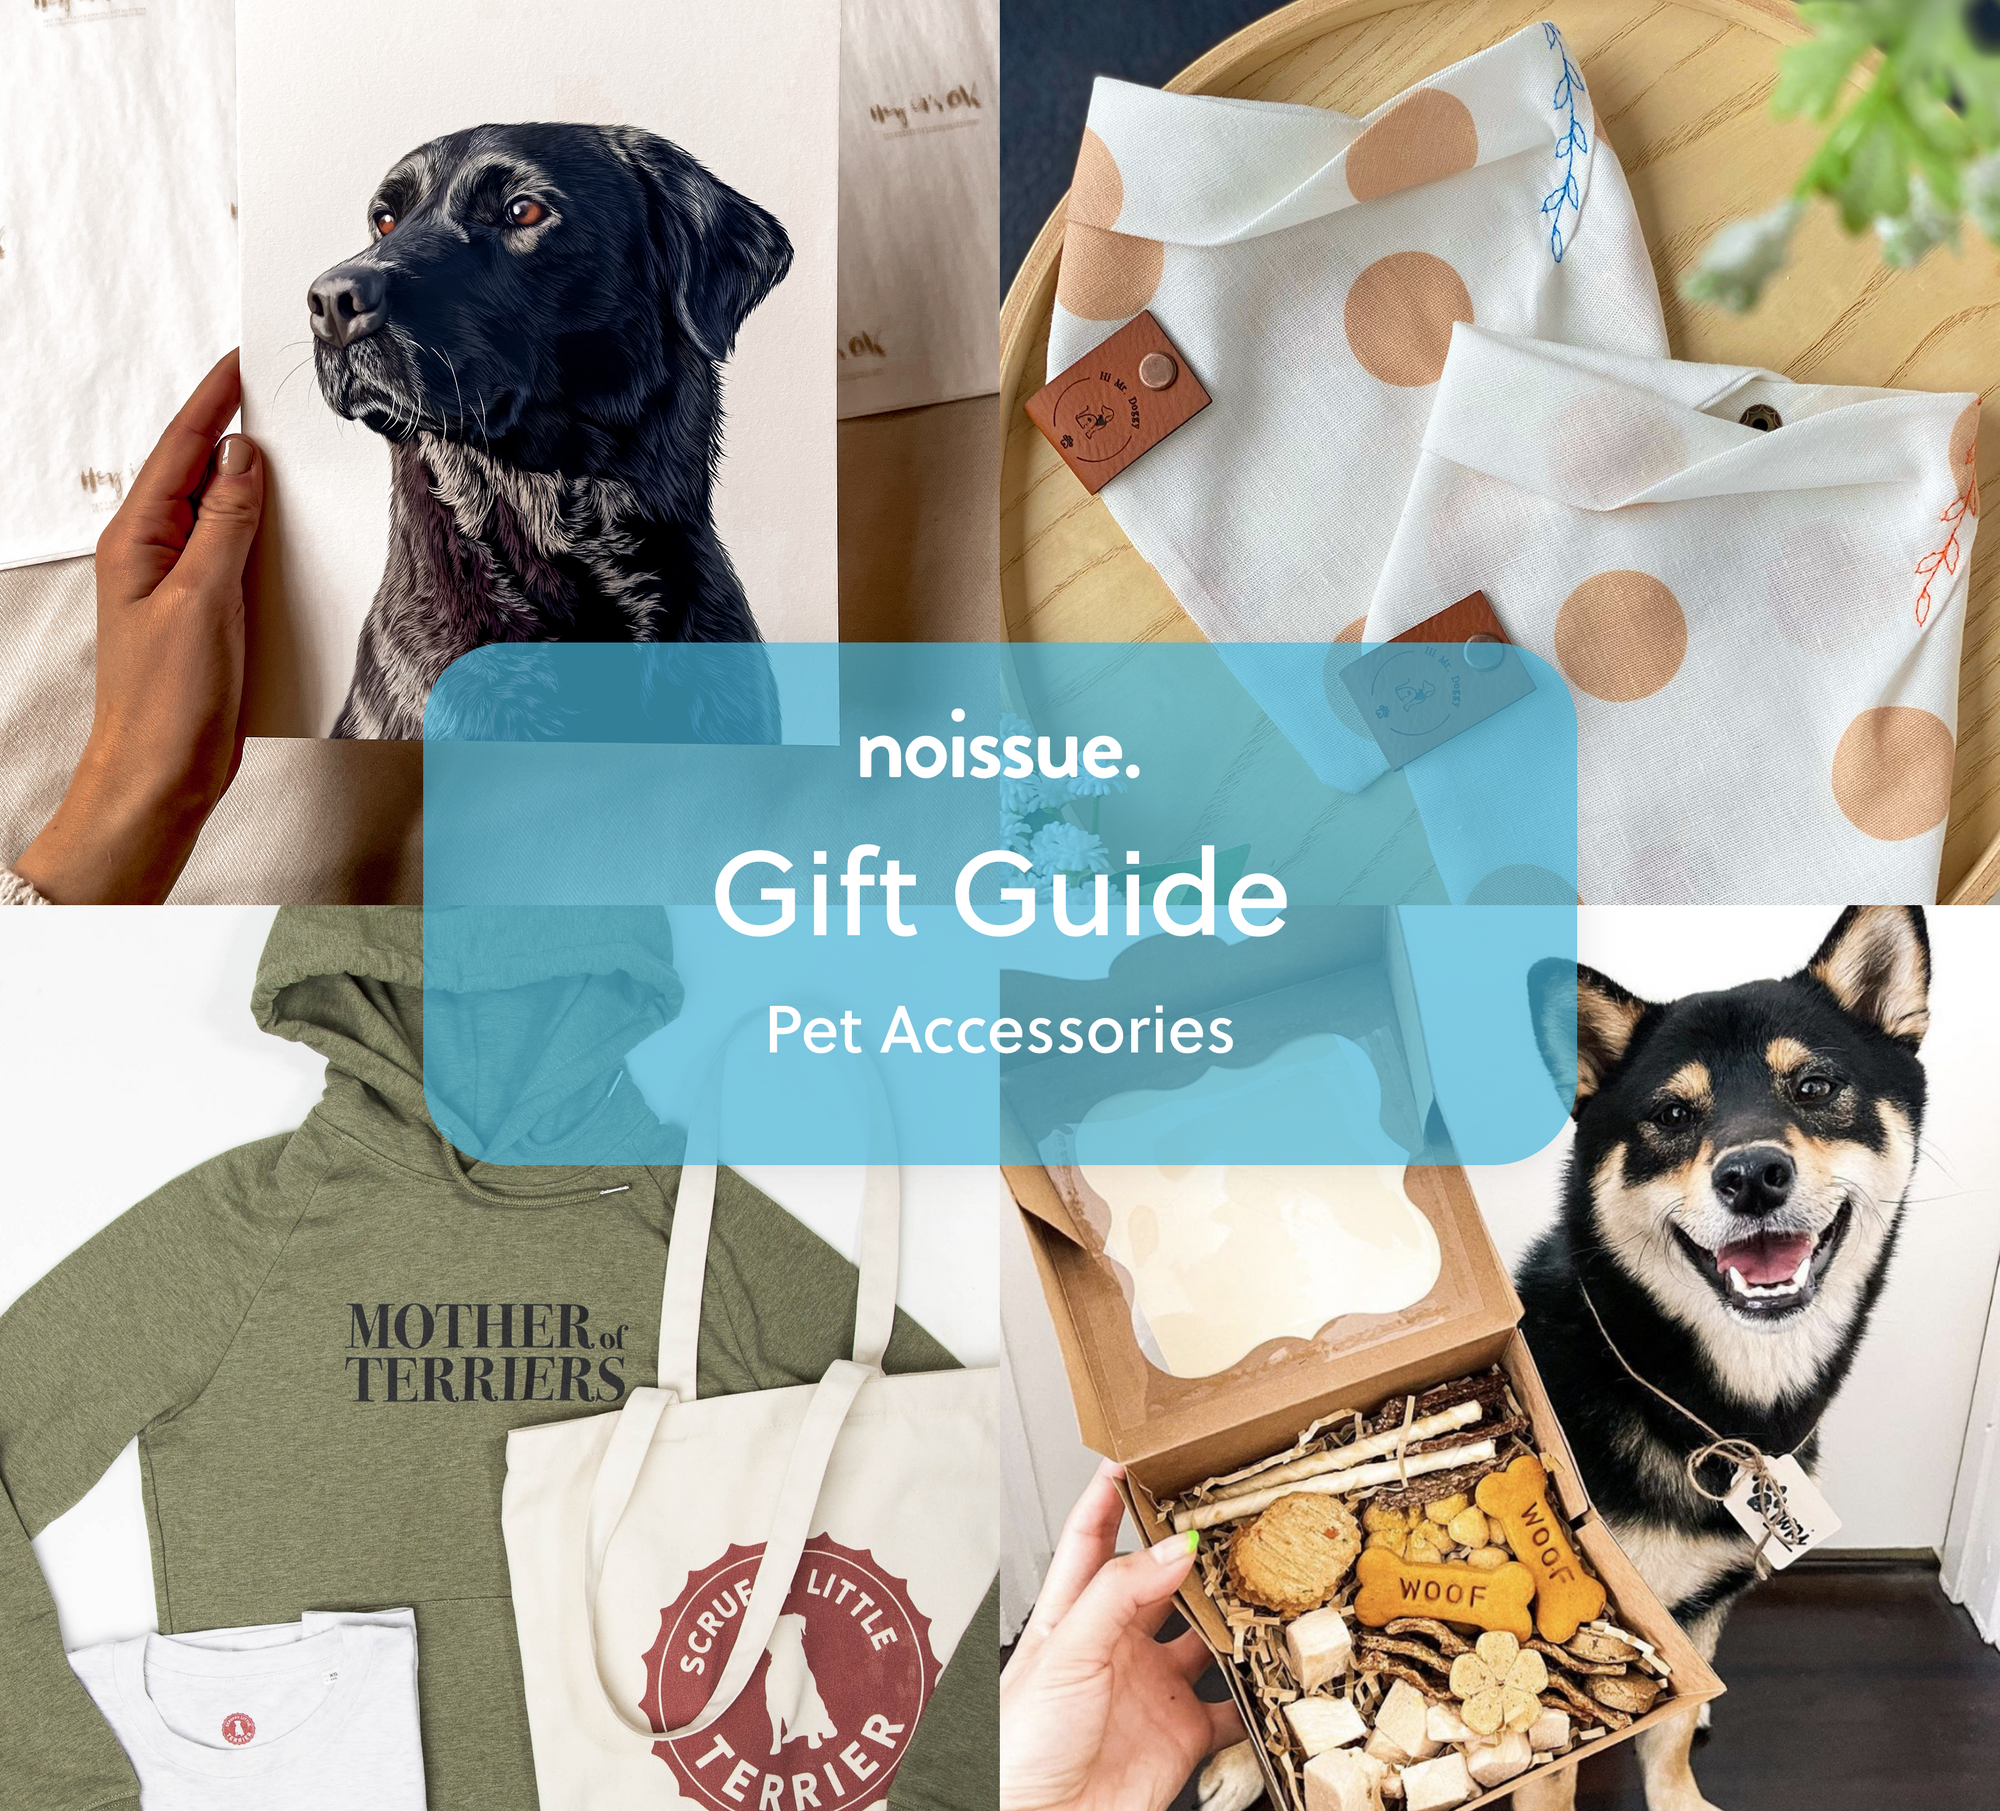 Celebrate the Holidays With These Pawsome Pet Gifts